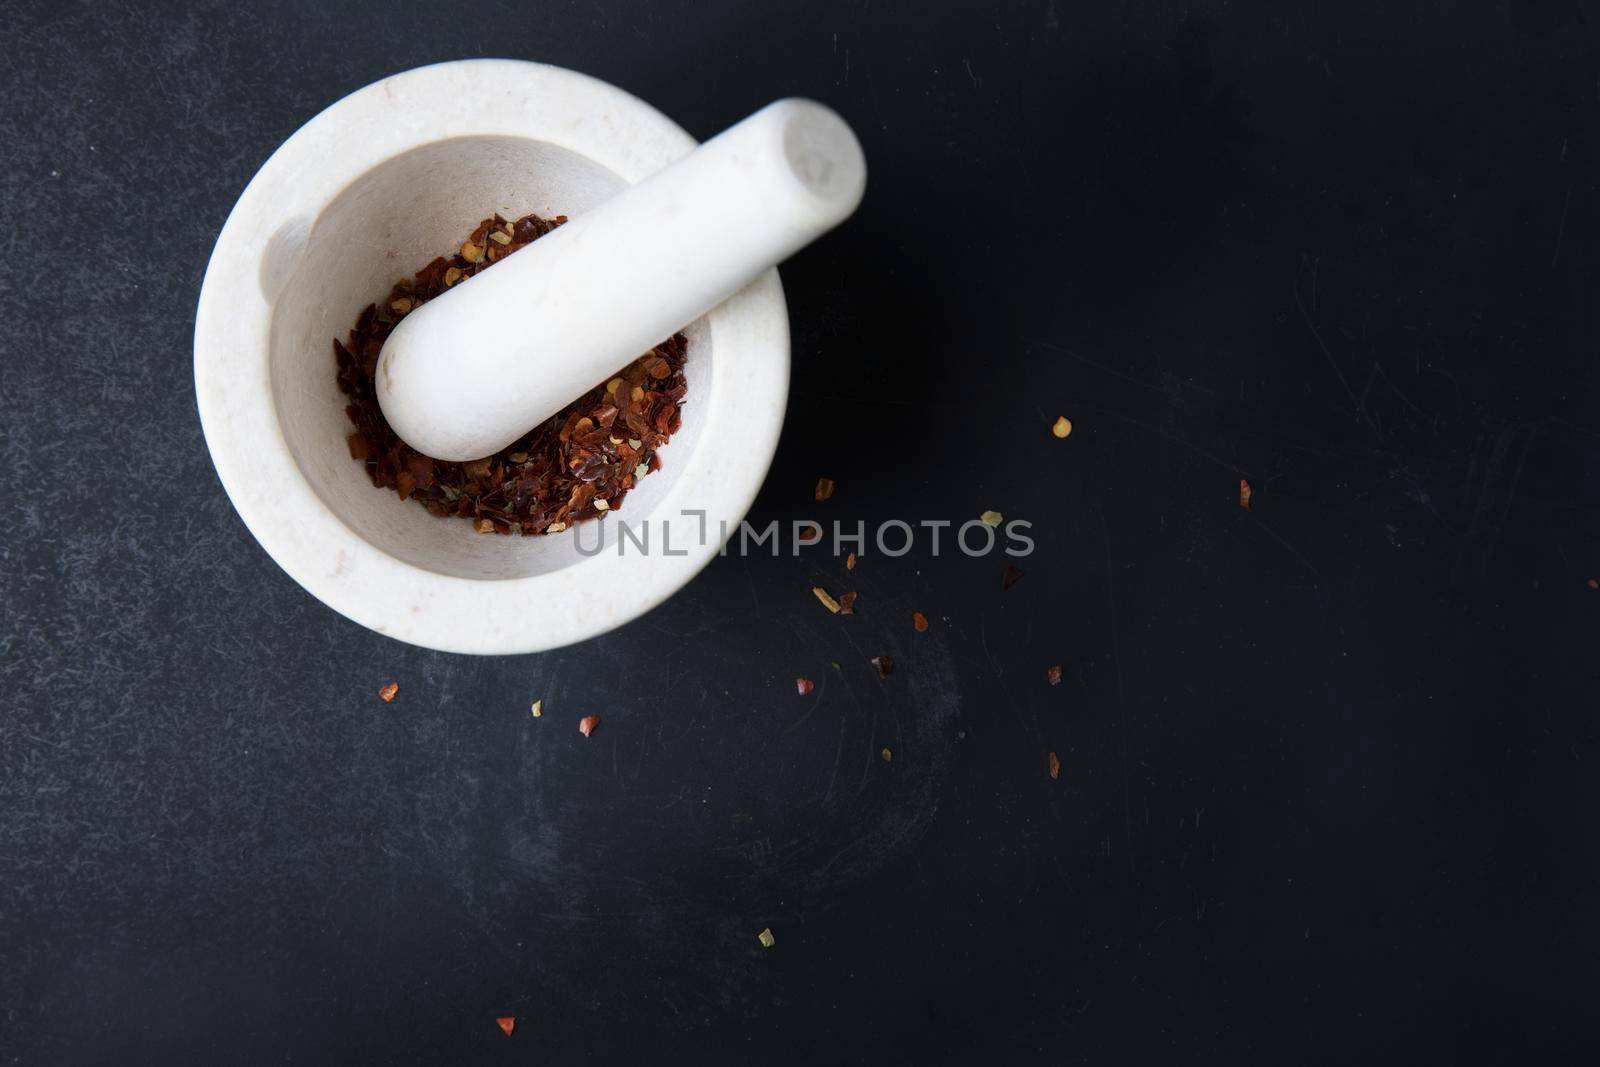 Small porcelain mortar and pestle with dried chili pepper on dark surface with copy space.